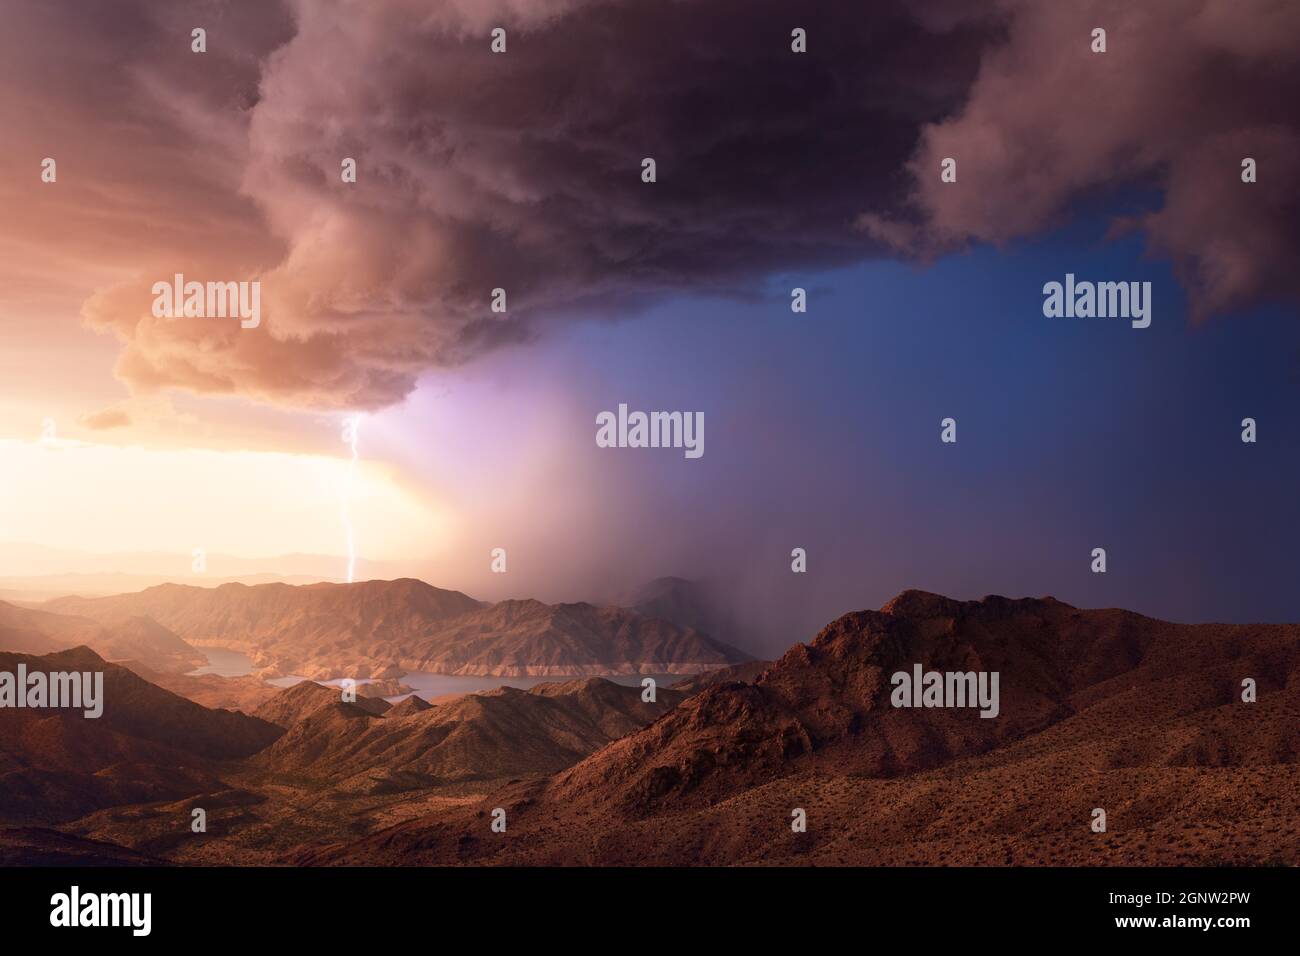 Lake Mead National Recreation Area with lightning storm and dramatic sky at sunset near Meadview, Arizona Stock Photo